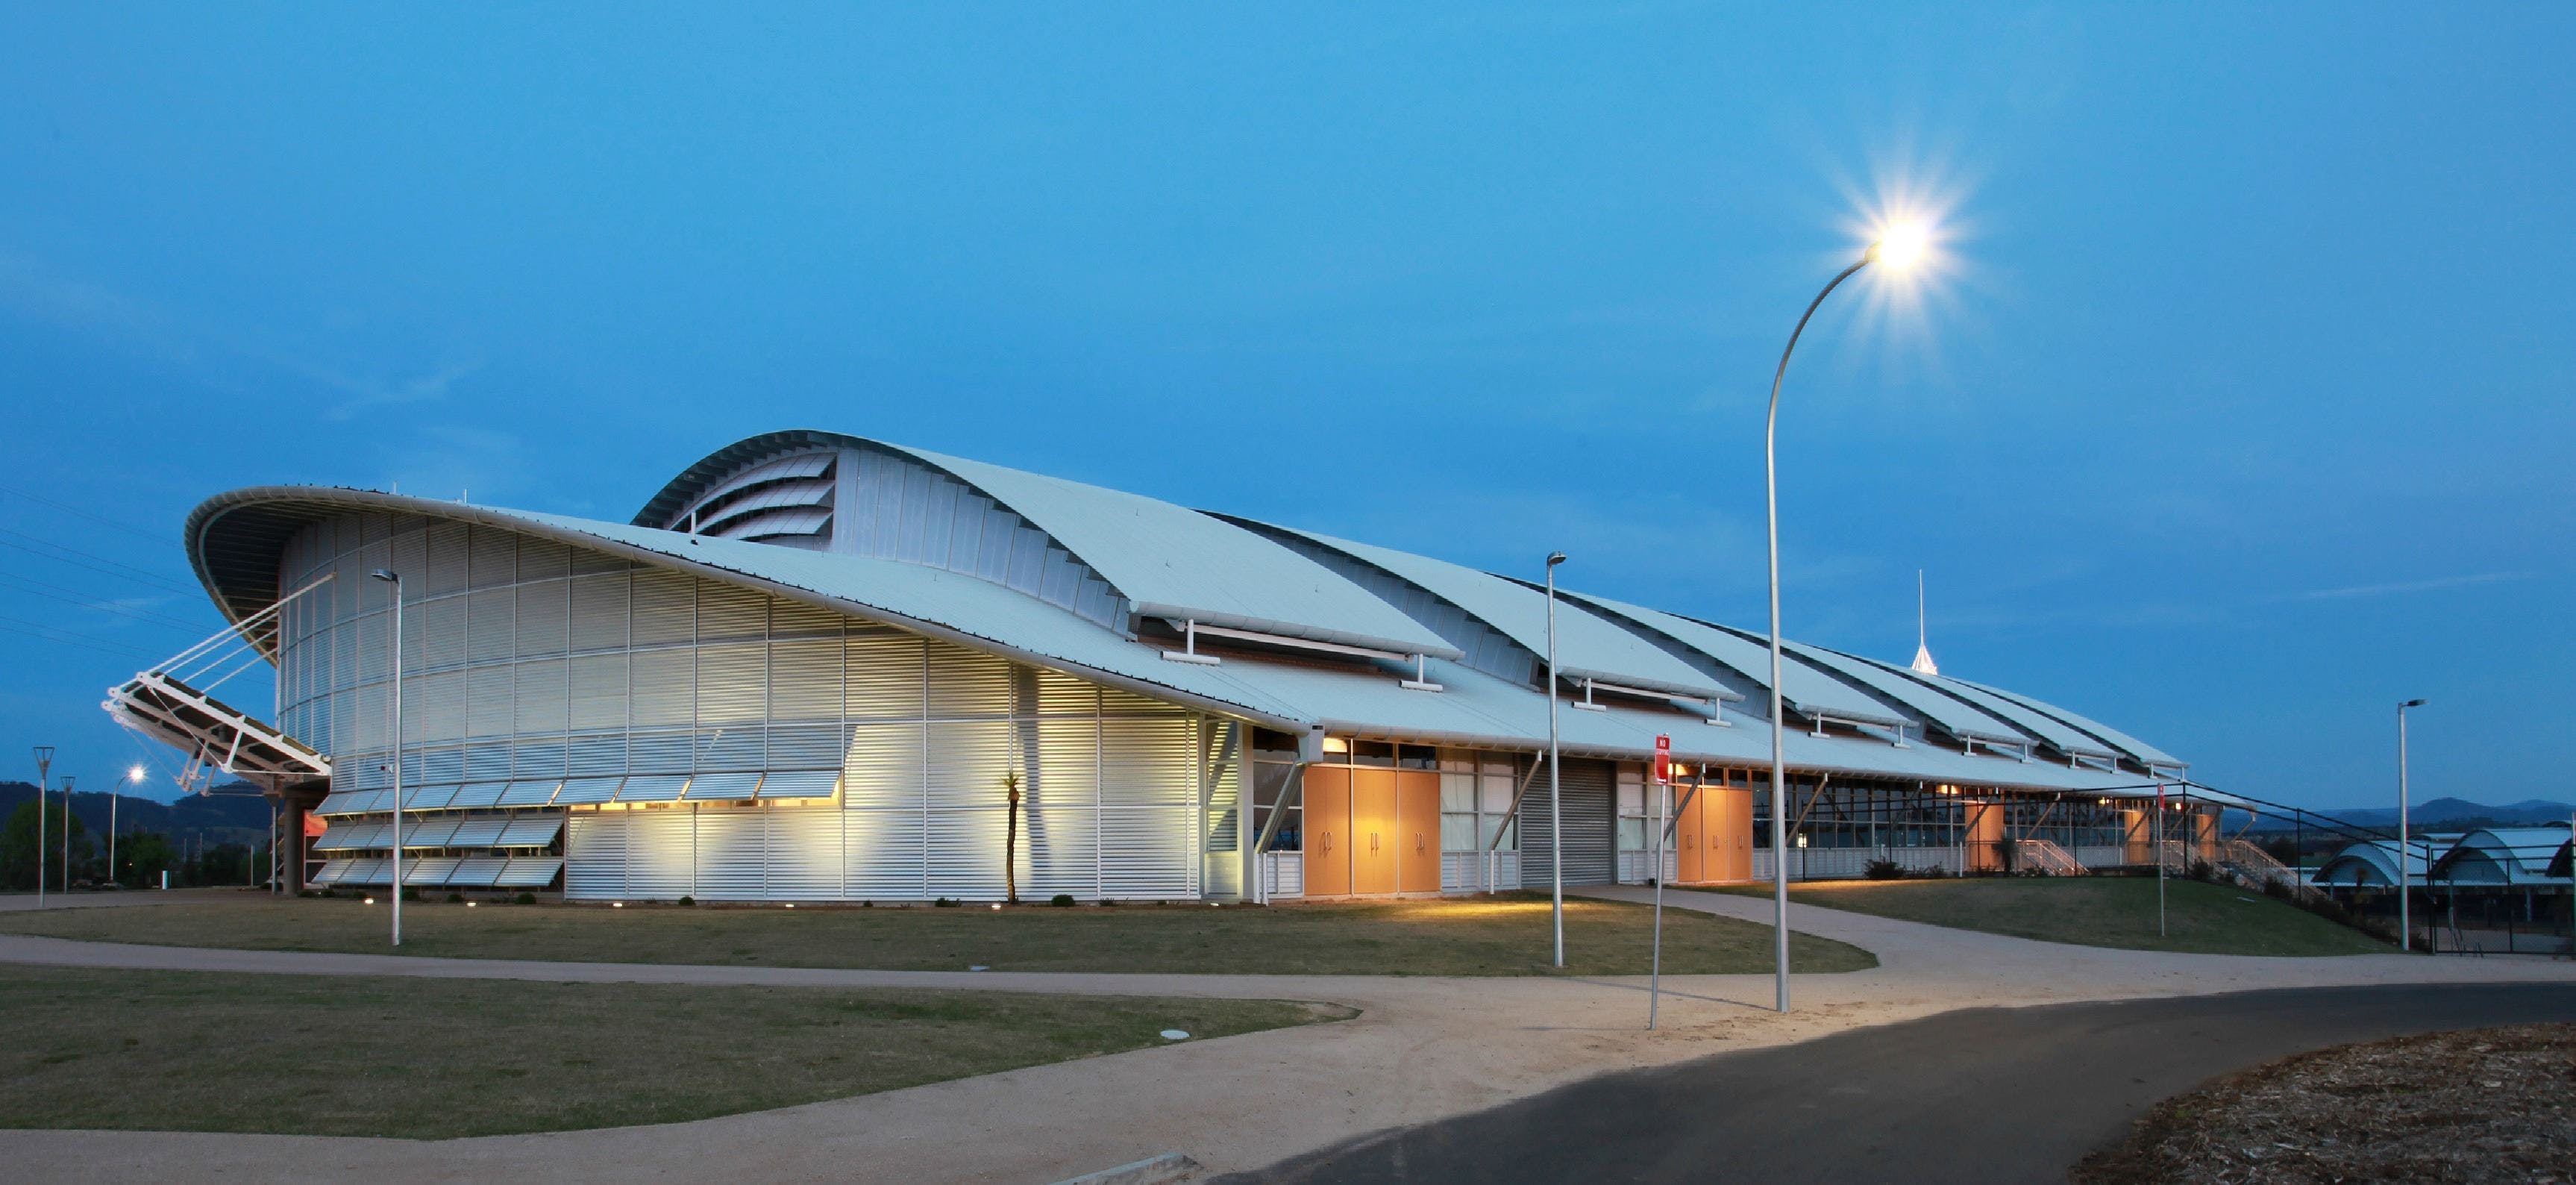 Australian Equine and Livestock Events Centre AELEC - Accommodation in Brisbane